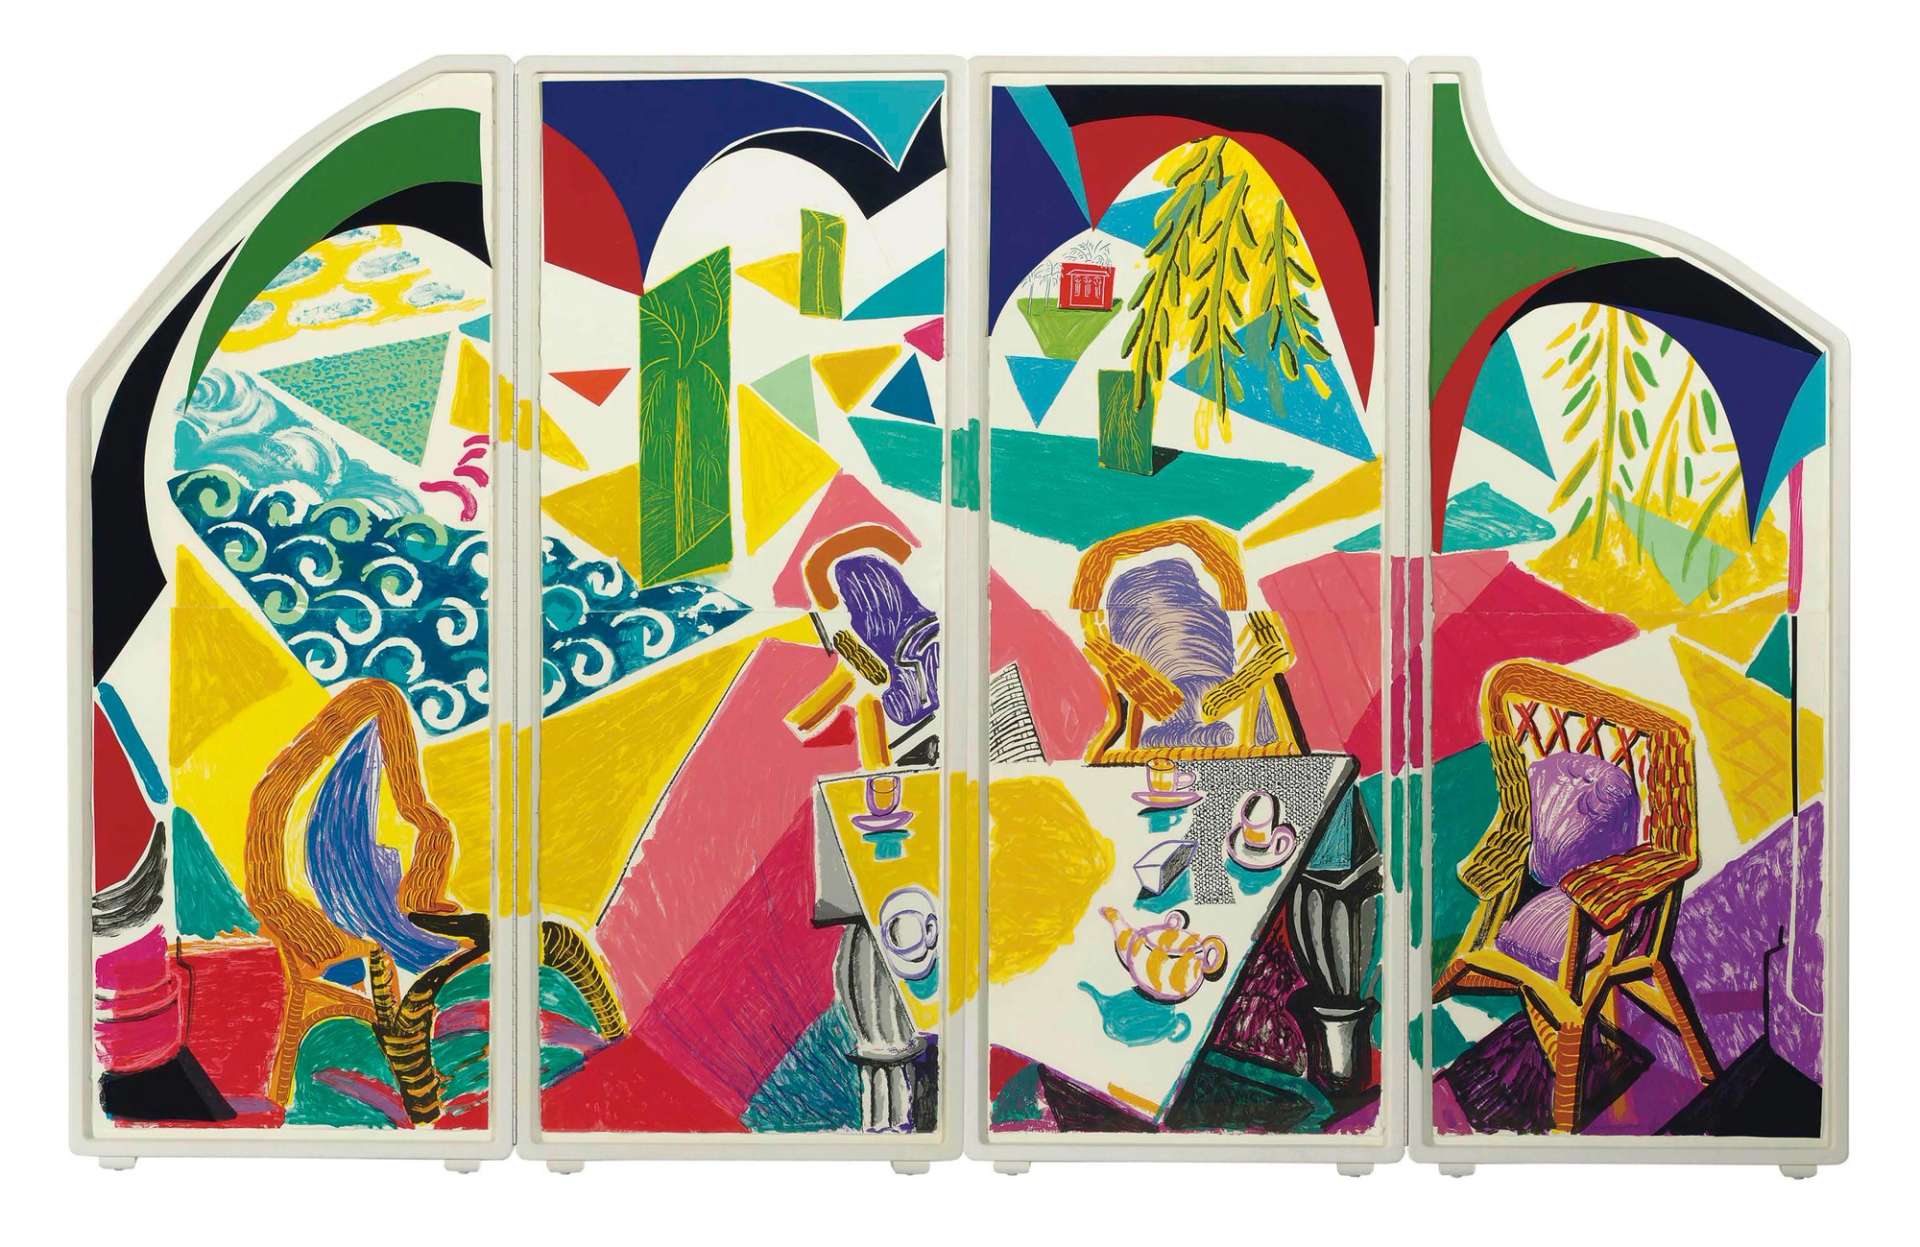 A lithograph by David Hockney depicting a colourful outdoor scene across four vertical panels.